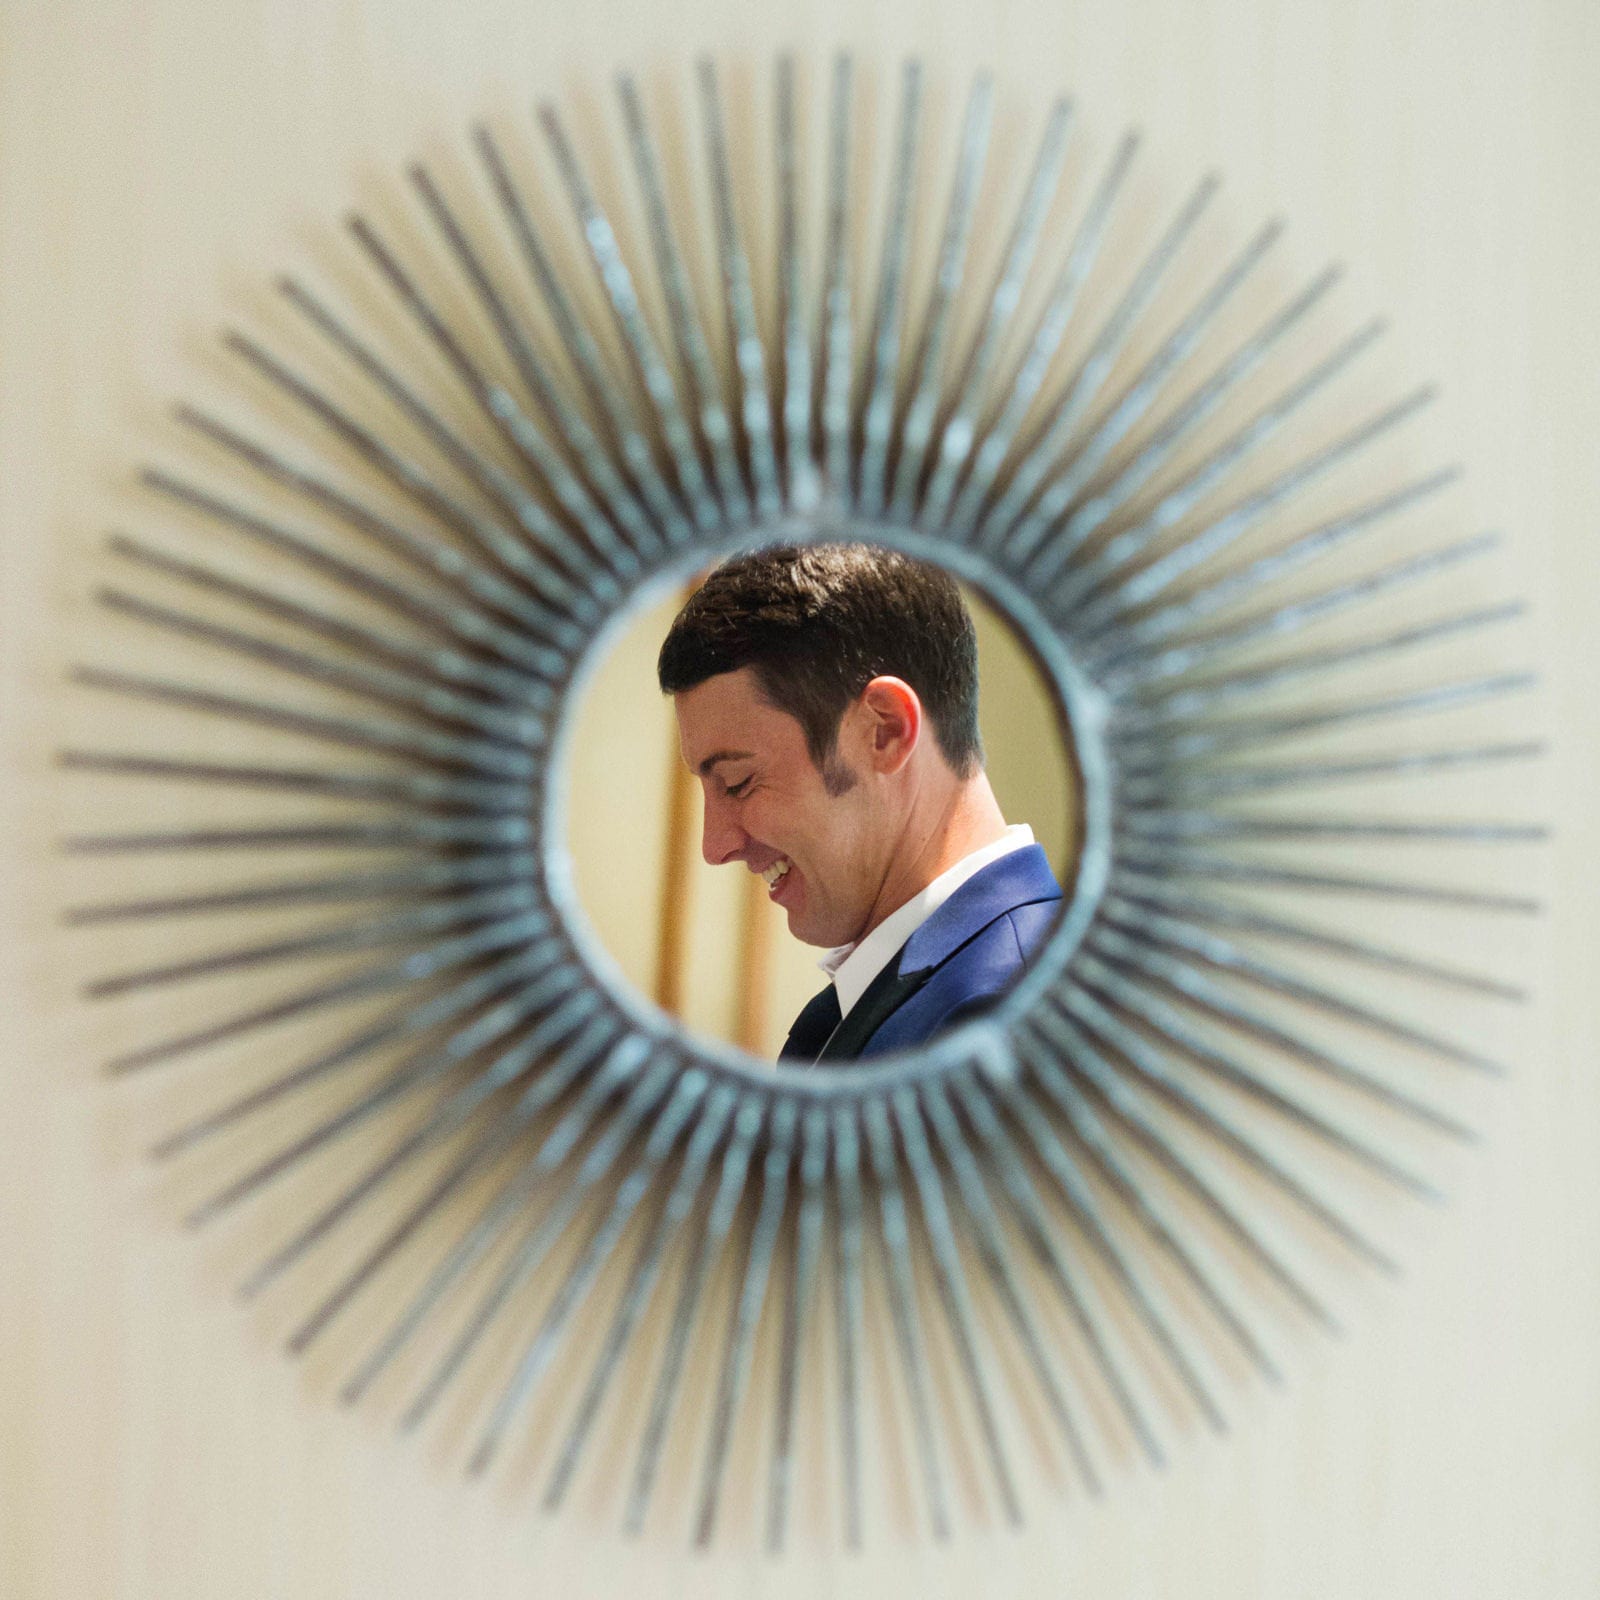 A smiling groom is reflected in a mirror with sunburst frame before a wedding at the Sheraton Station Square.